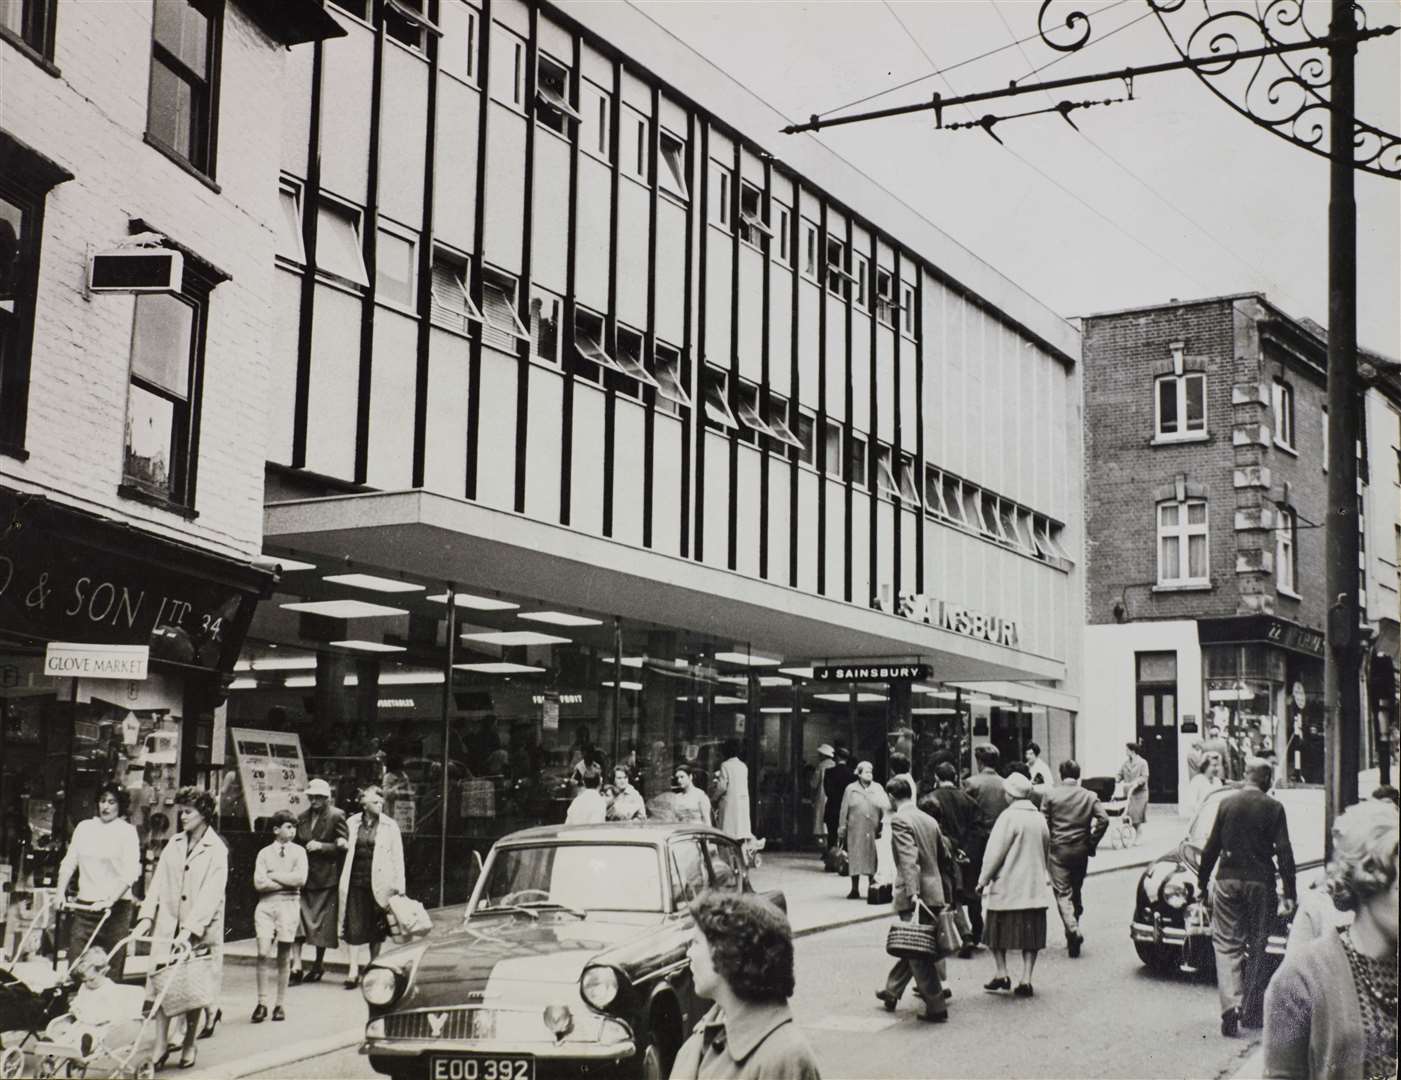 How Sainsbury's store looked in Gabriels Hill, Maidstone, in 1962. Picture: The Sainsbury Archive, Museum of London Docklands